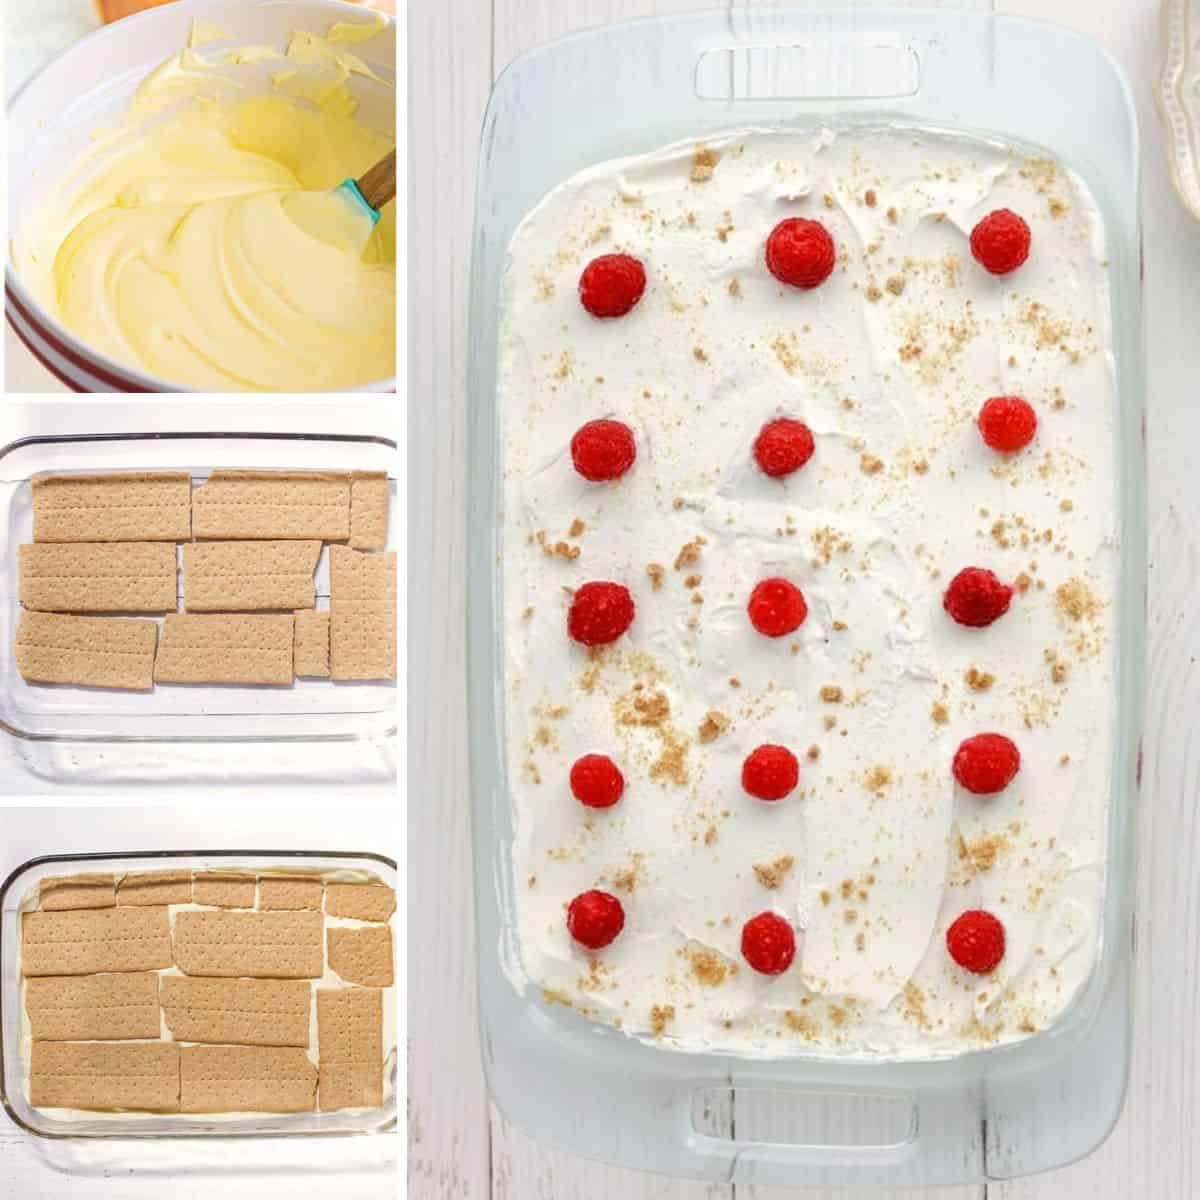 Four image collage of steps to make the ice box lemon cake: mix pudding mixture in a bowl, layer graham crackers in baking dish, top with pudding mixture and repeat layers, top with cool whip and fresh berries.